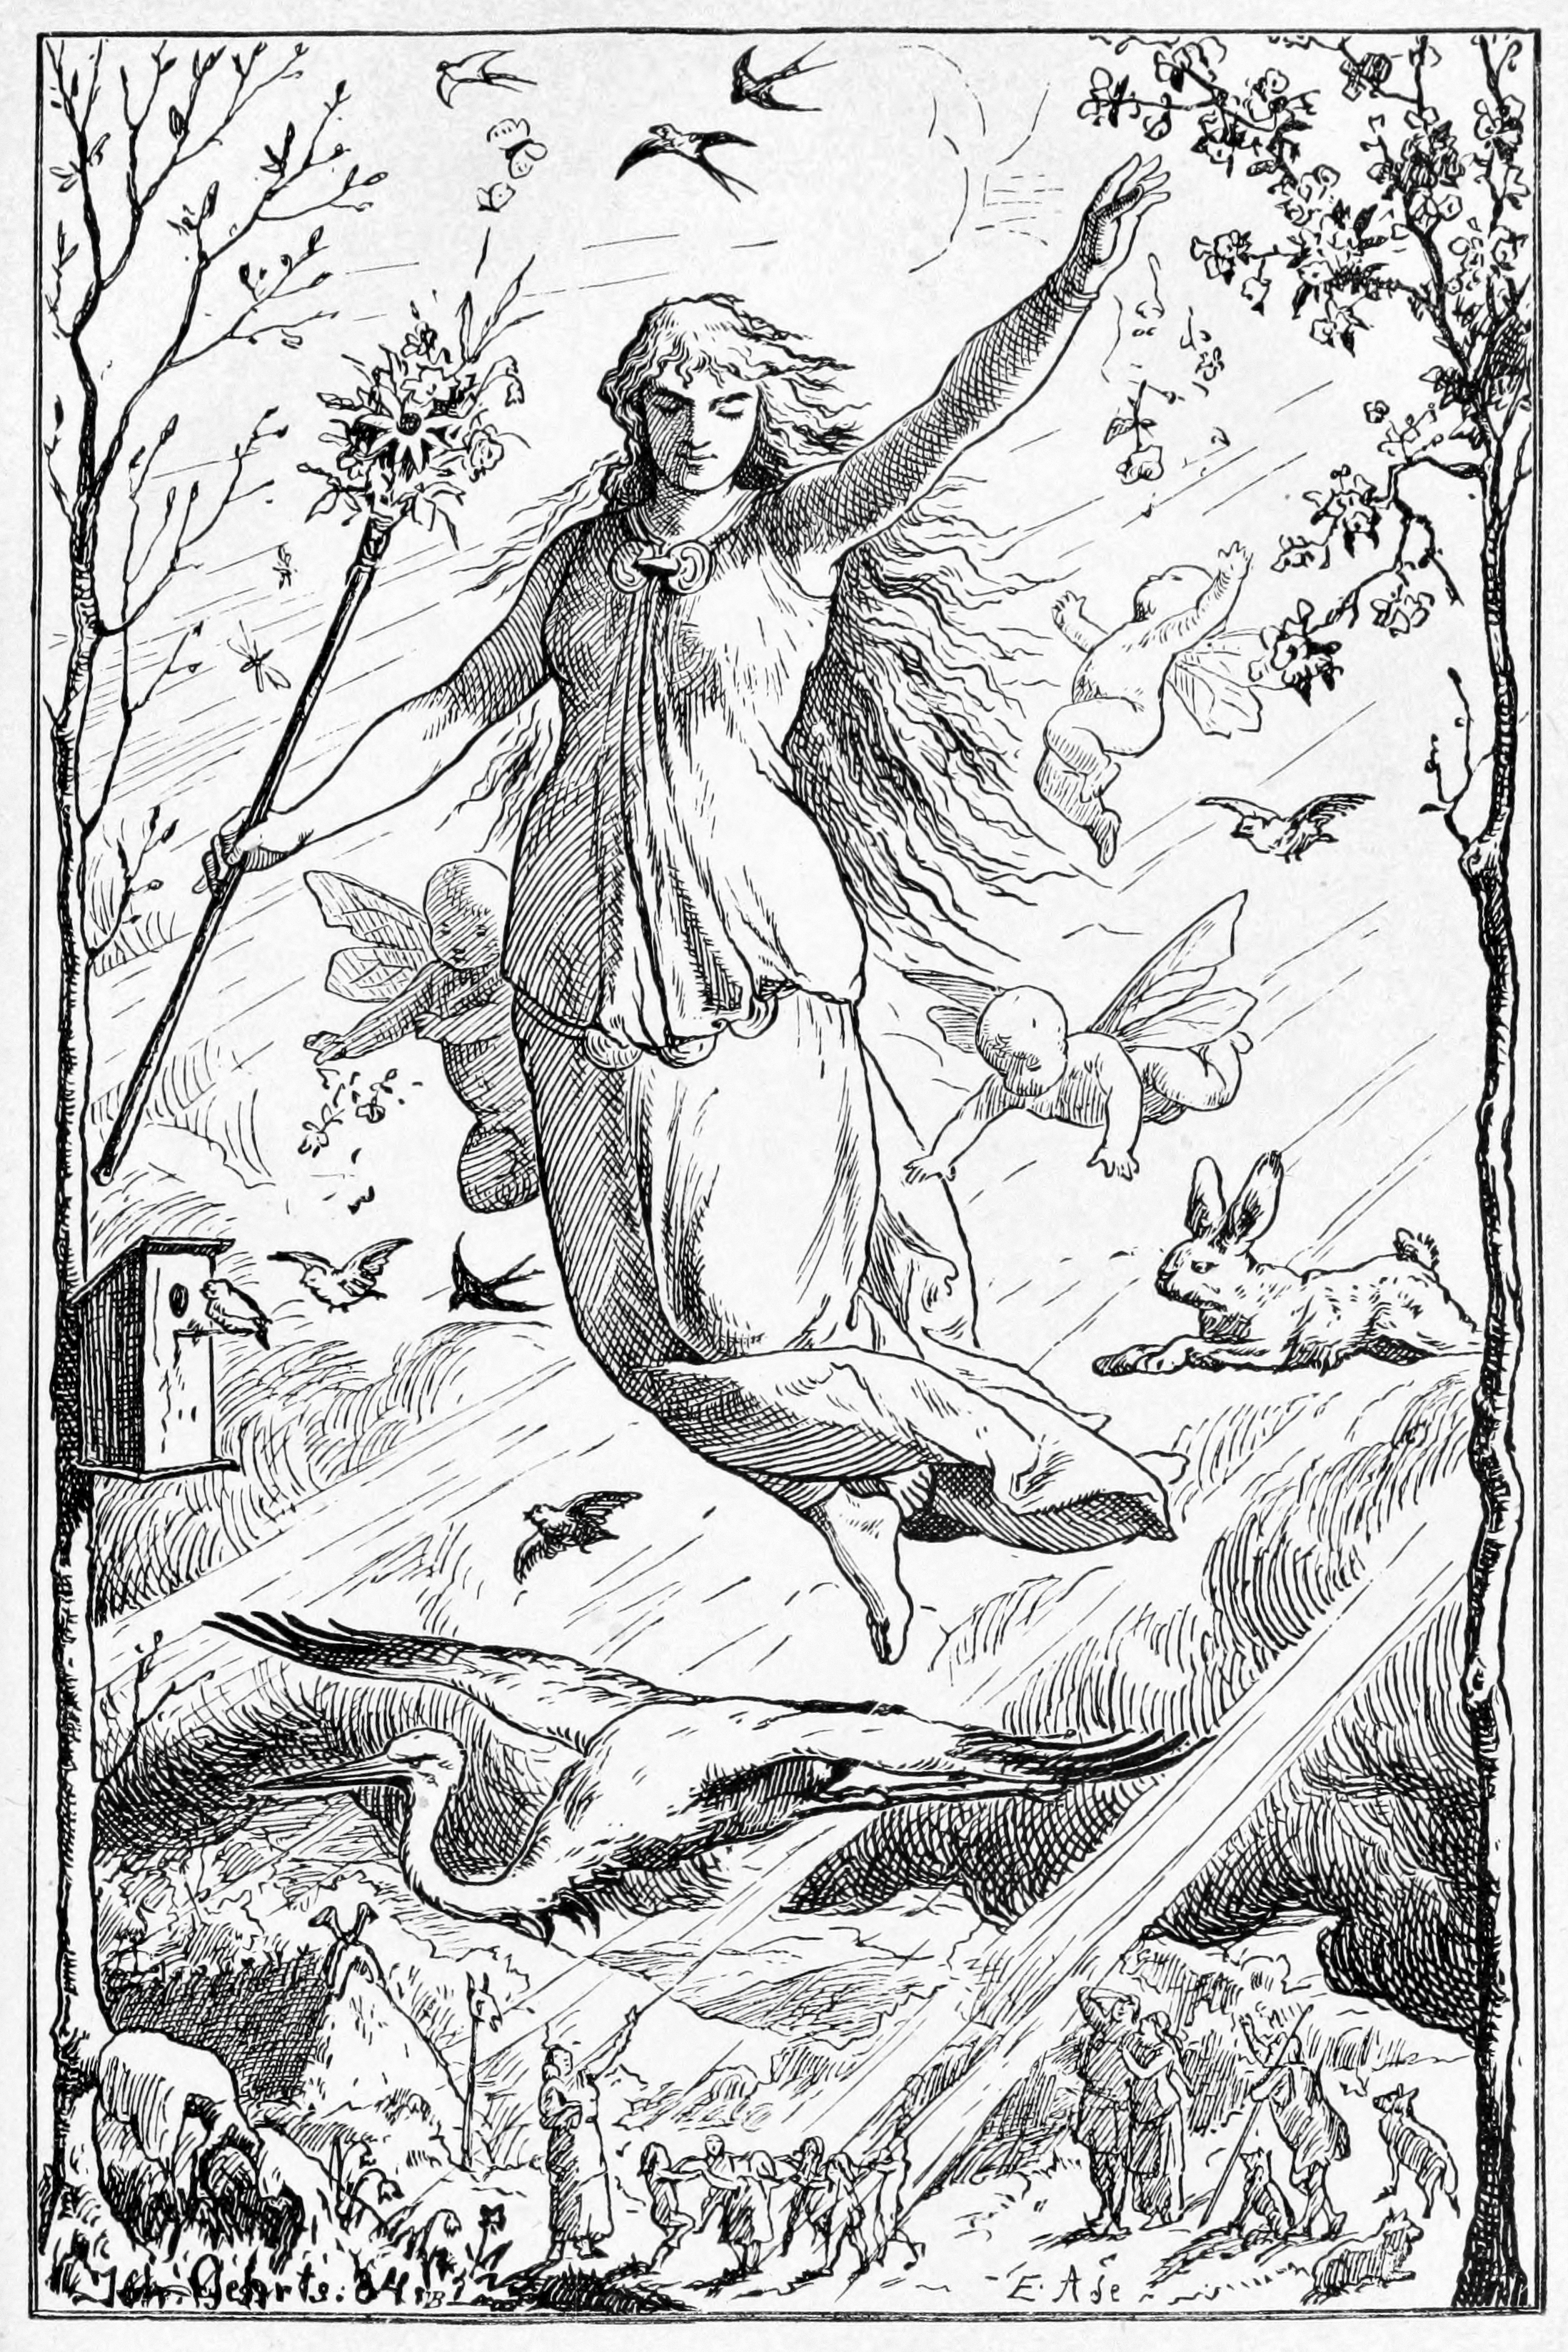 The idea of Ostara became popular after the 1800s, but there's no actual evidence of her during Pagan times, and only one post-Christian mention in 723.